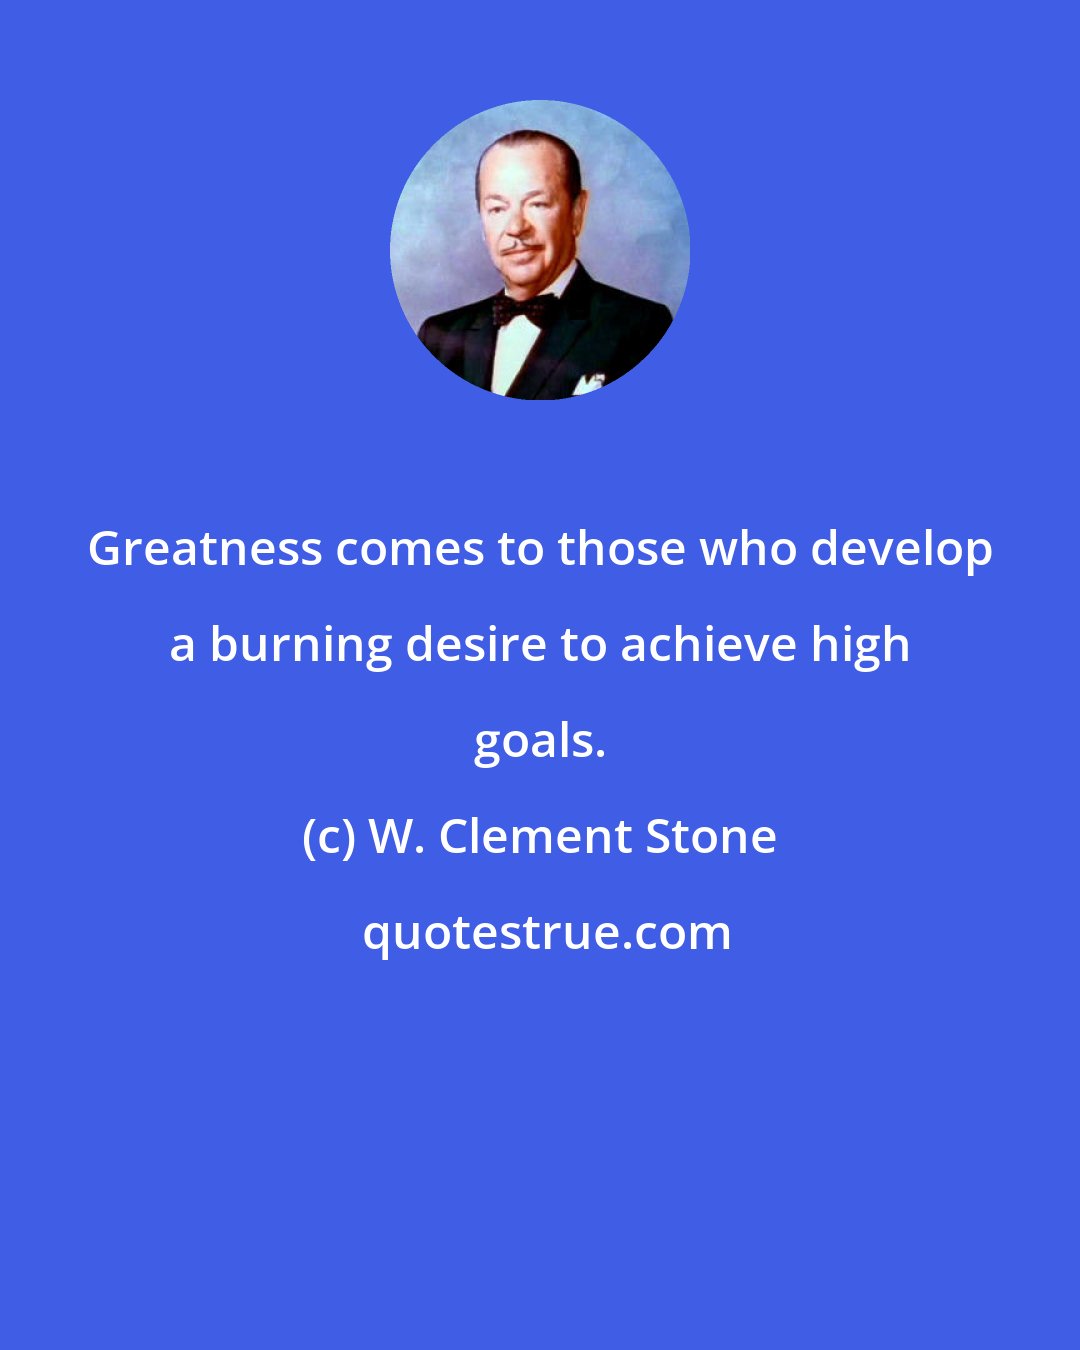 W. Clement Stone: Greatness comes to those who develop a burning desire to achieve high goals.